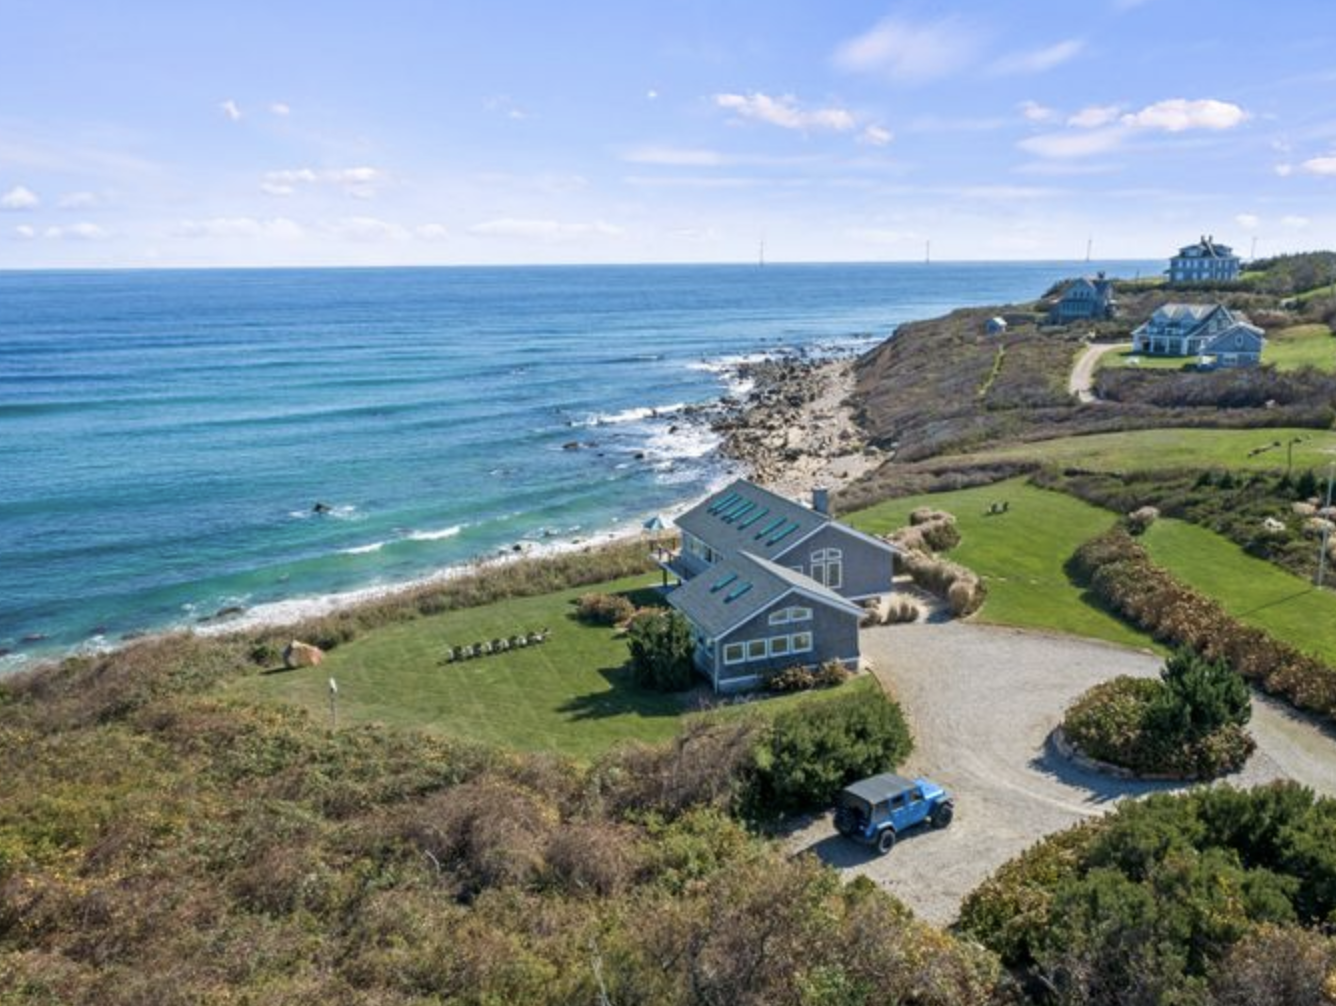 ROSEMARY TOBIN & EMMA ANDY OF LILA DELMAN COMPASS  SELL WATERFRONT BLOCK ISLAND COTTAGE FOR $3.3M